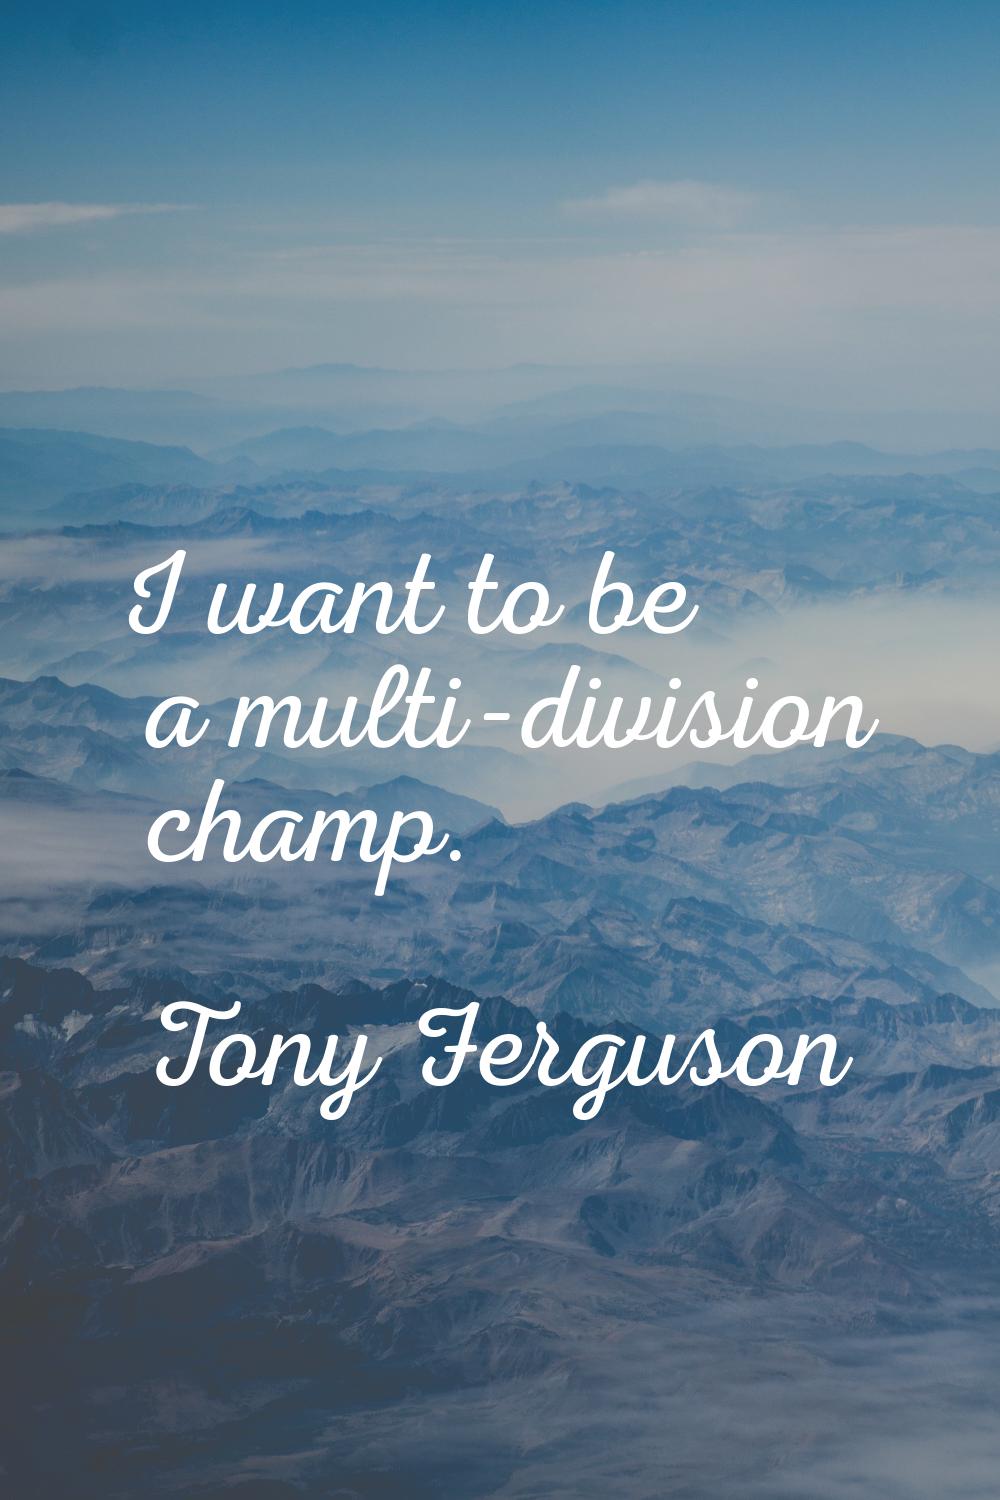 I want to be a multi-division champ.